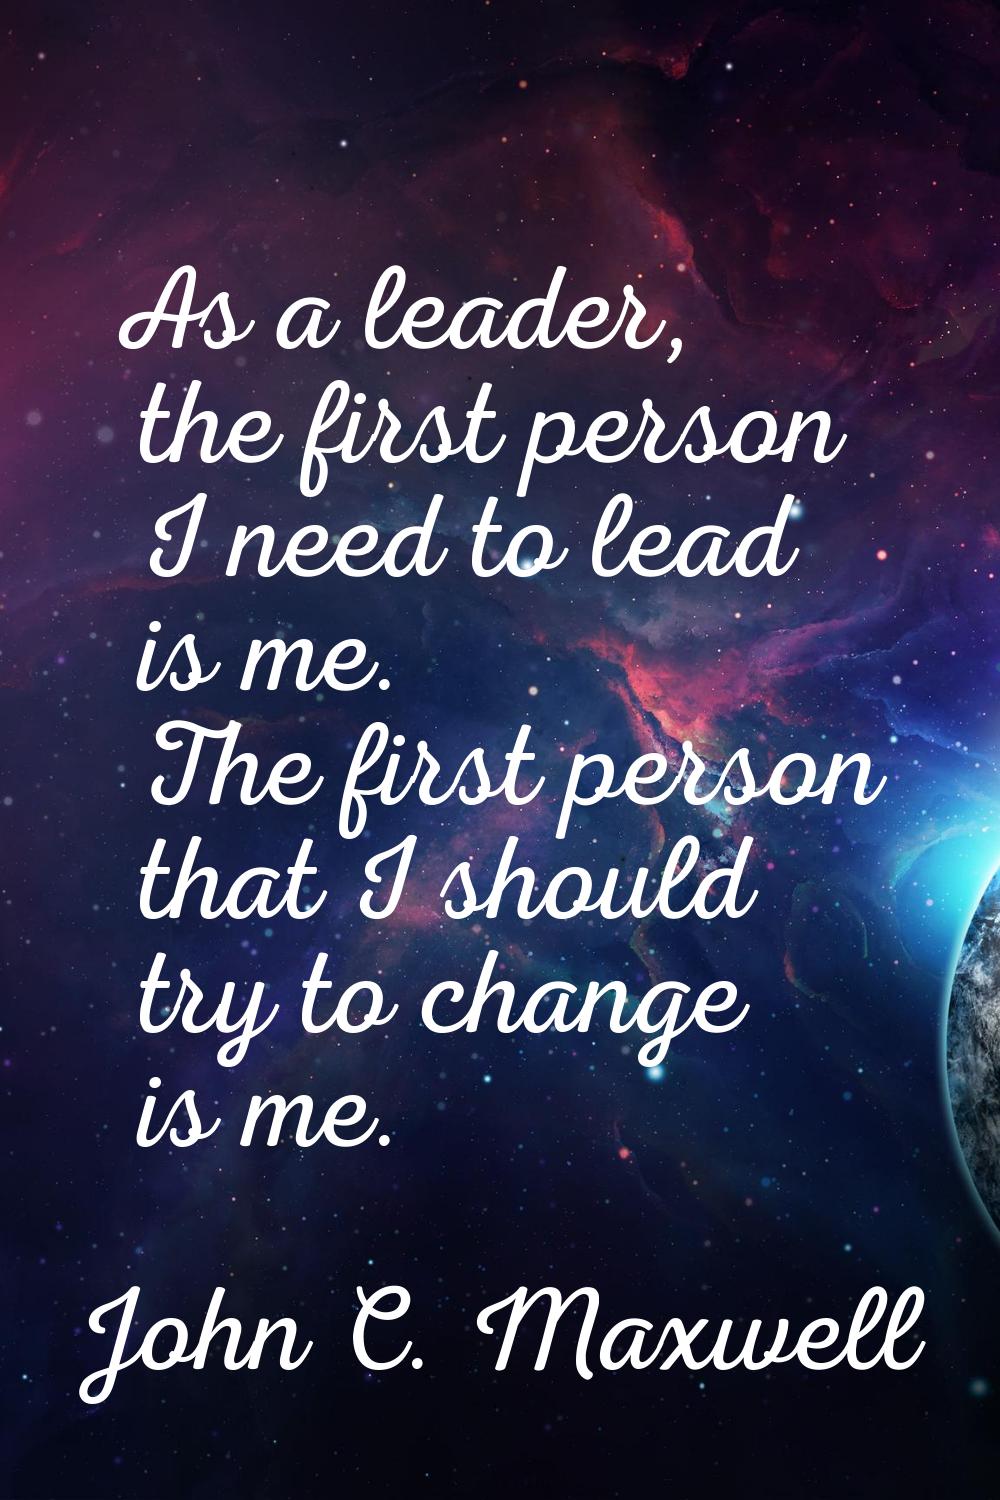 As a leader, the first person I need to lead is me. The first person that I should try to change is